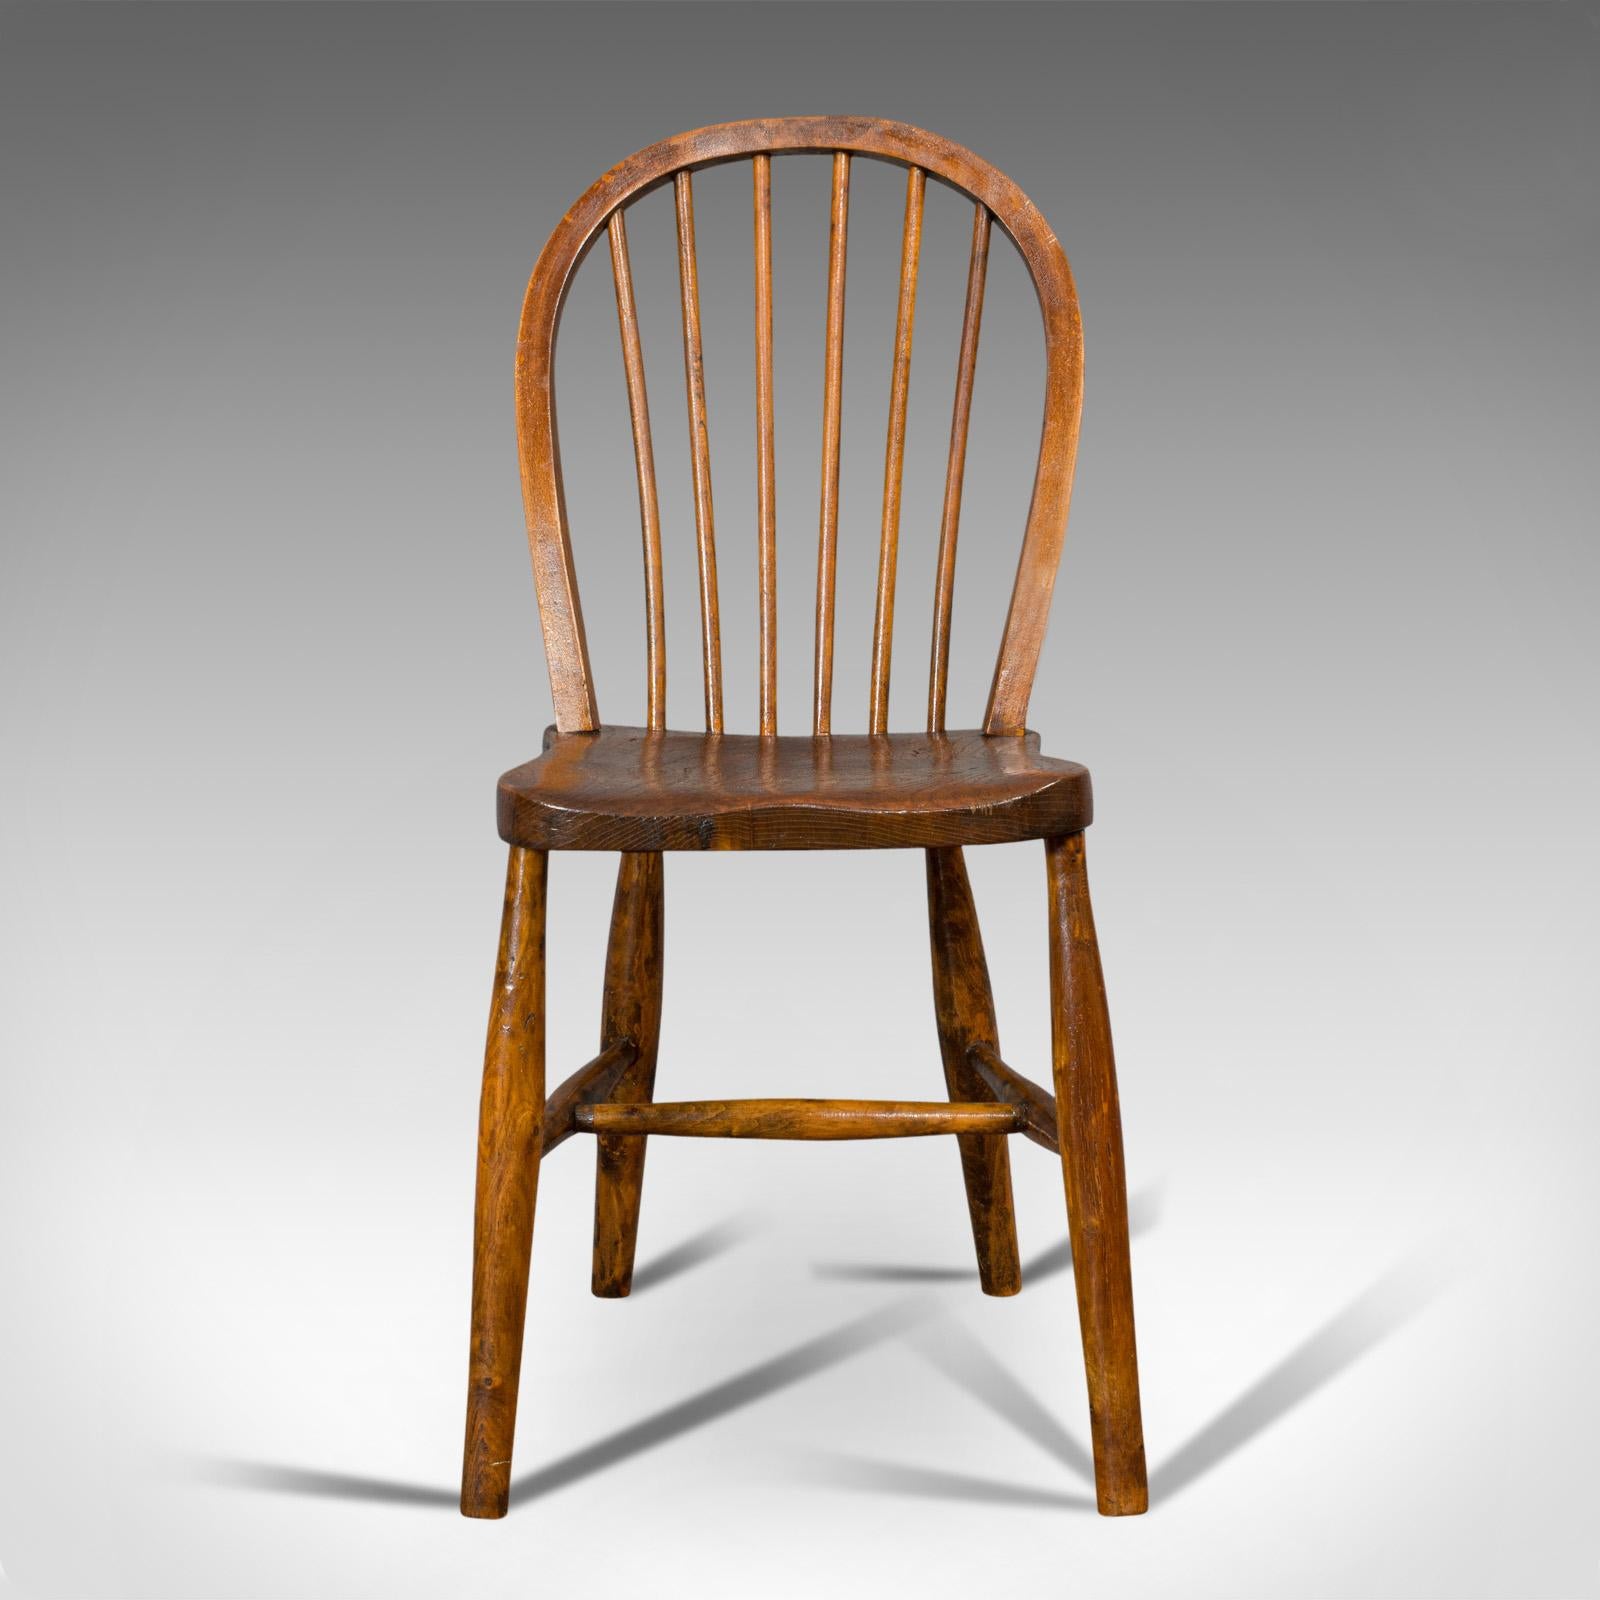 This is an antique stick back chair. An English, elm and beech station seat, dating to the Victorian period, circa 1870.

Charming Victorian seat with wonderful figuring
Displays a desirable aged patina
Select elm and beech show fine grain